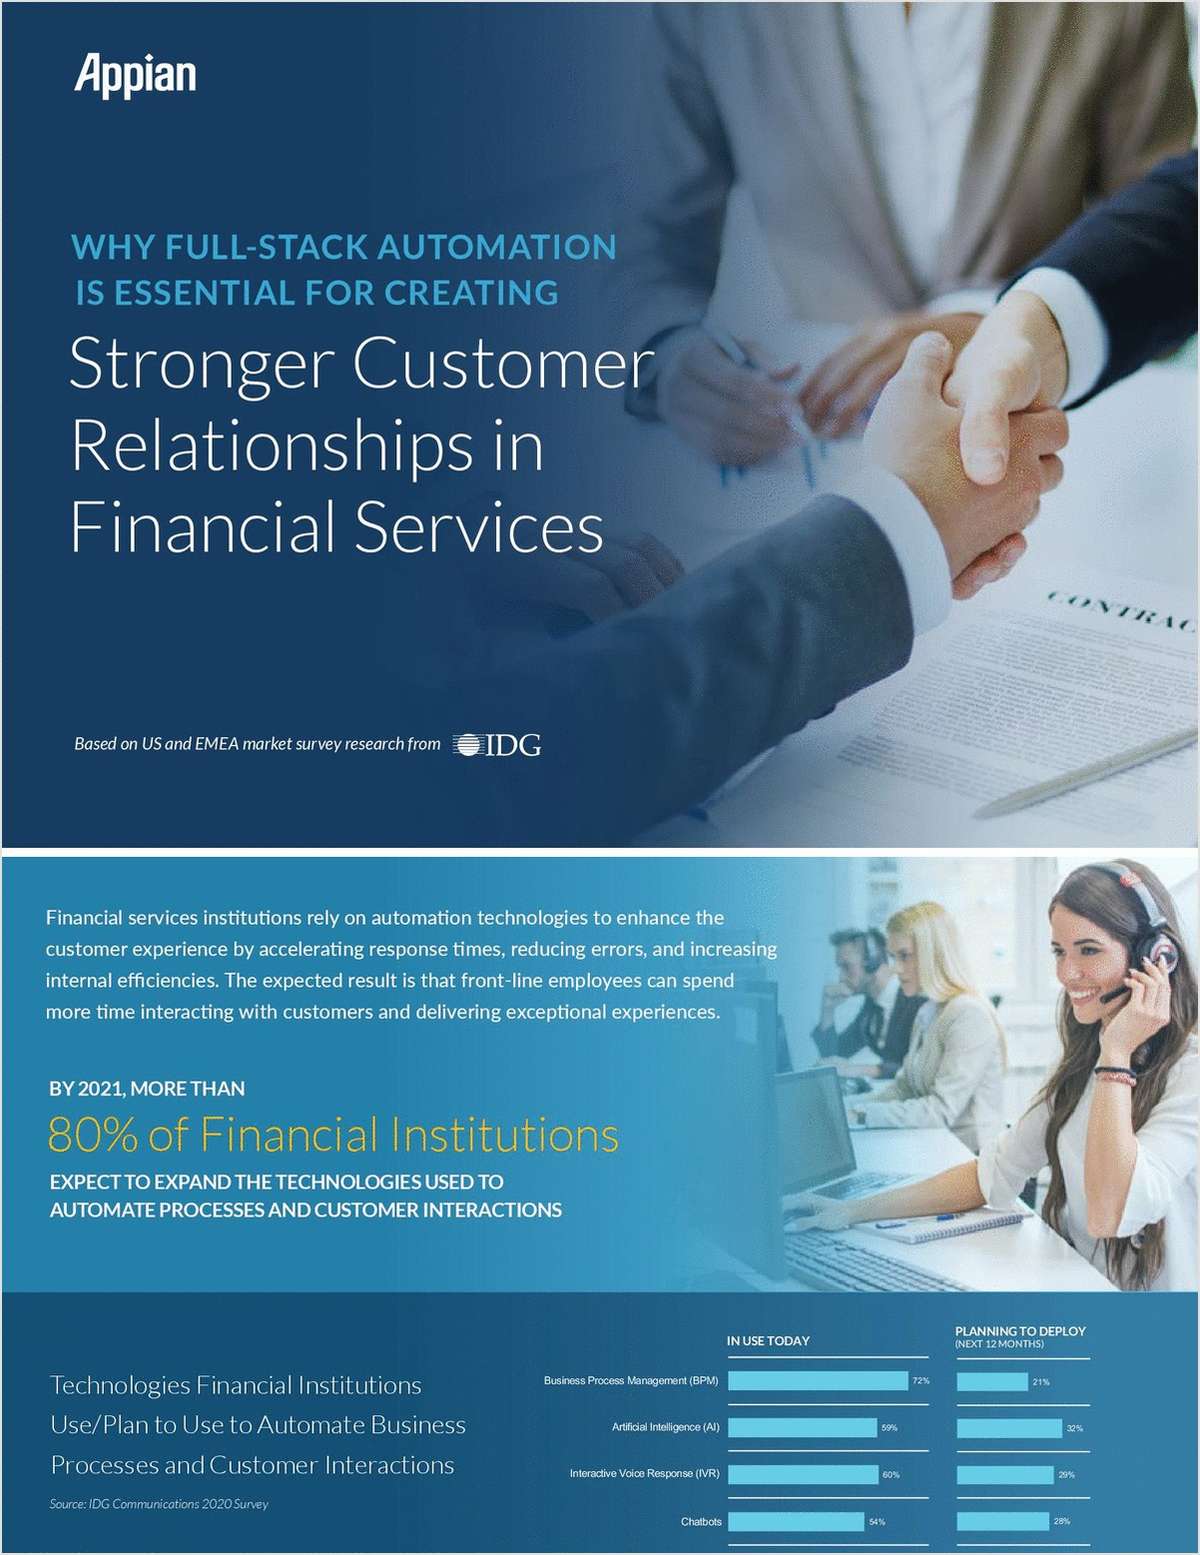 Why Full-Stack Automation Is Essential for Creating Stronger Customer Relationships In Financial Services